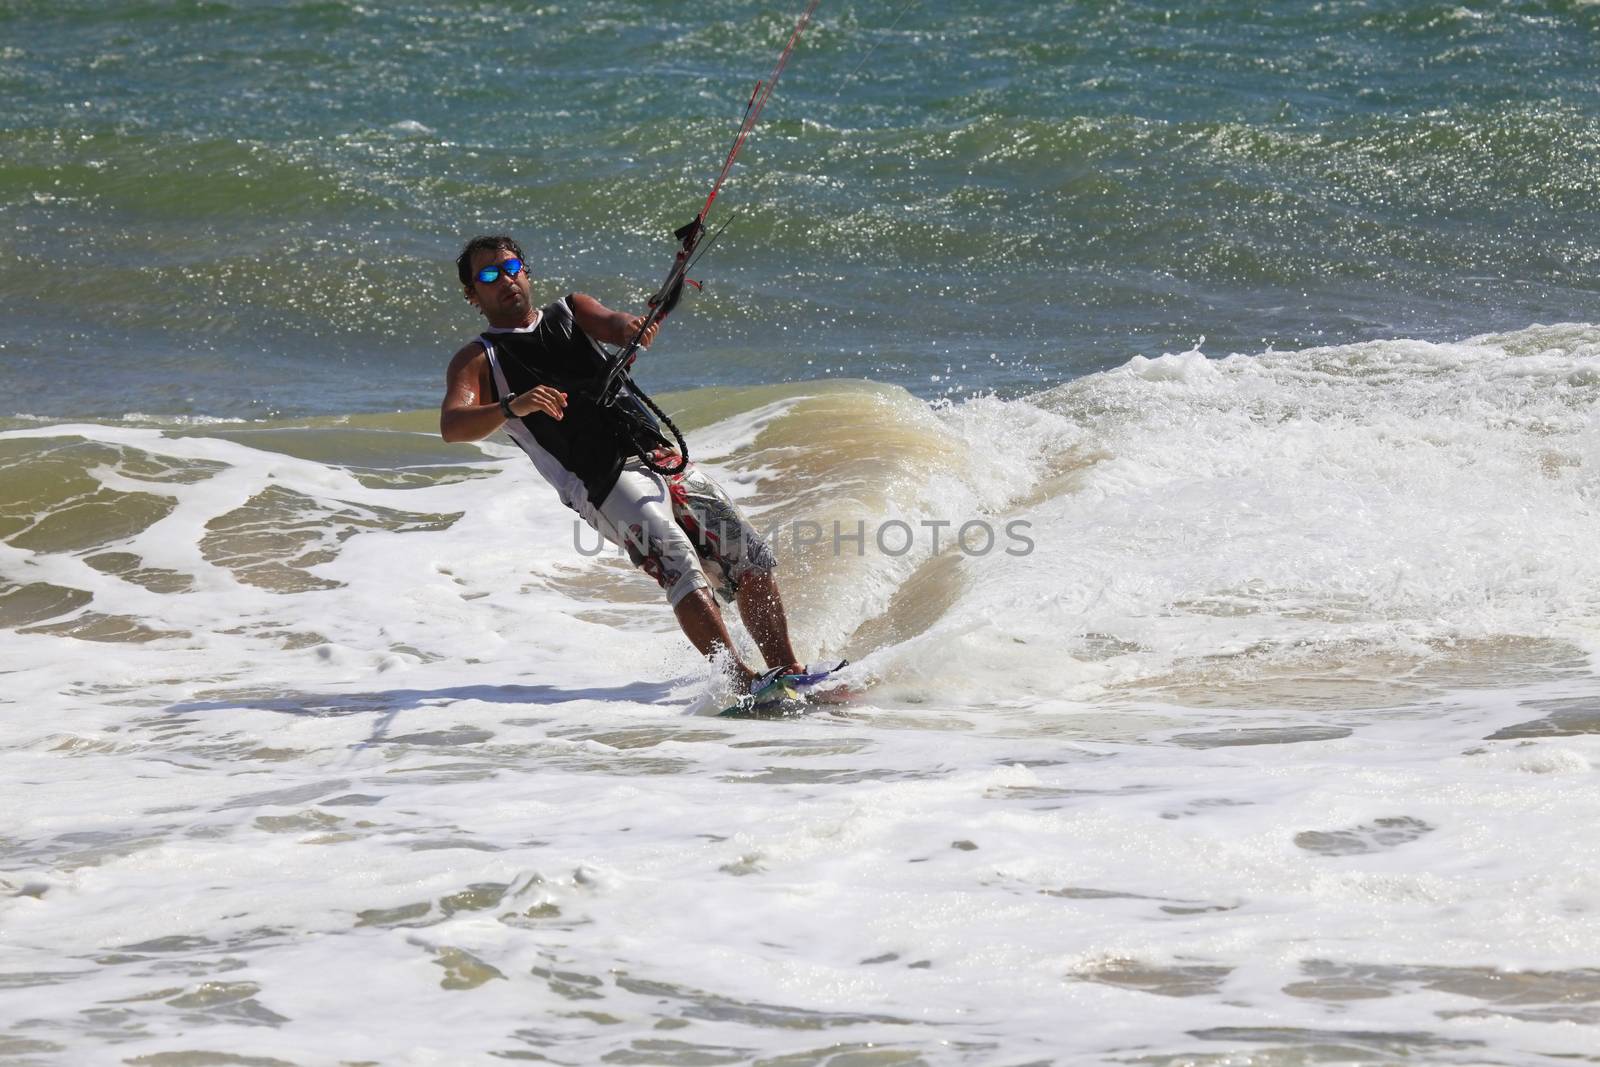 Kitesurfer in action by friday